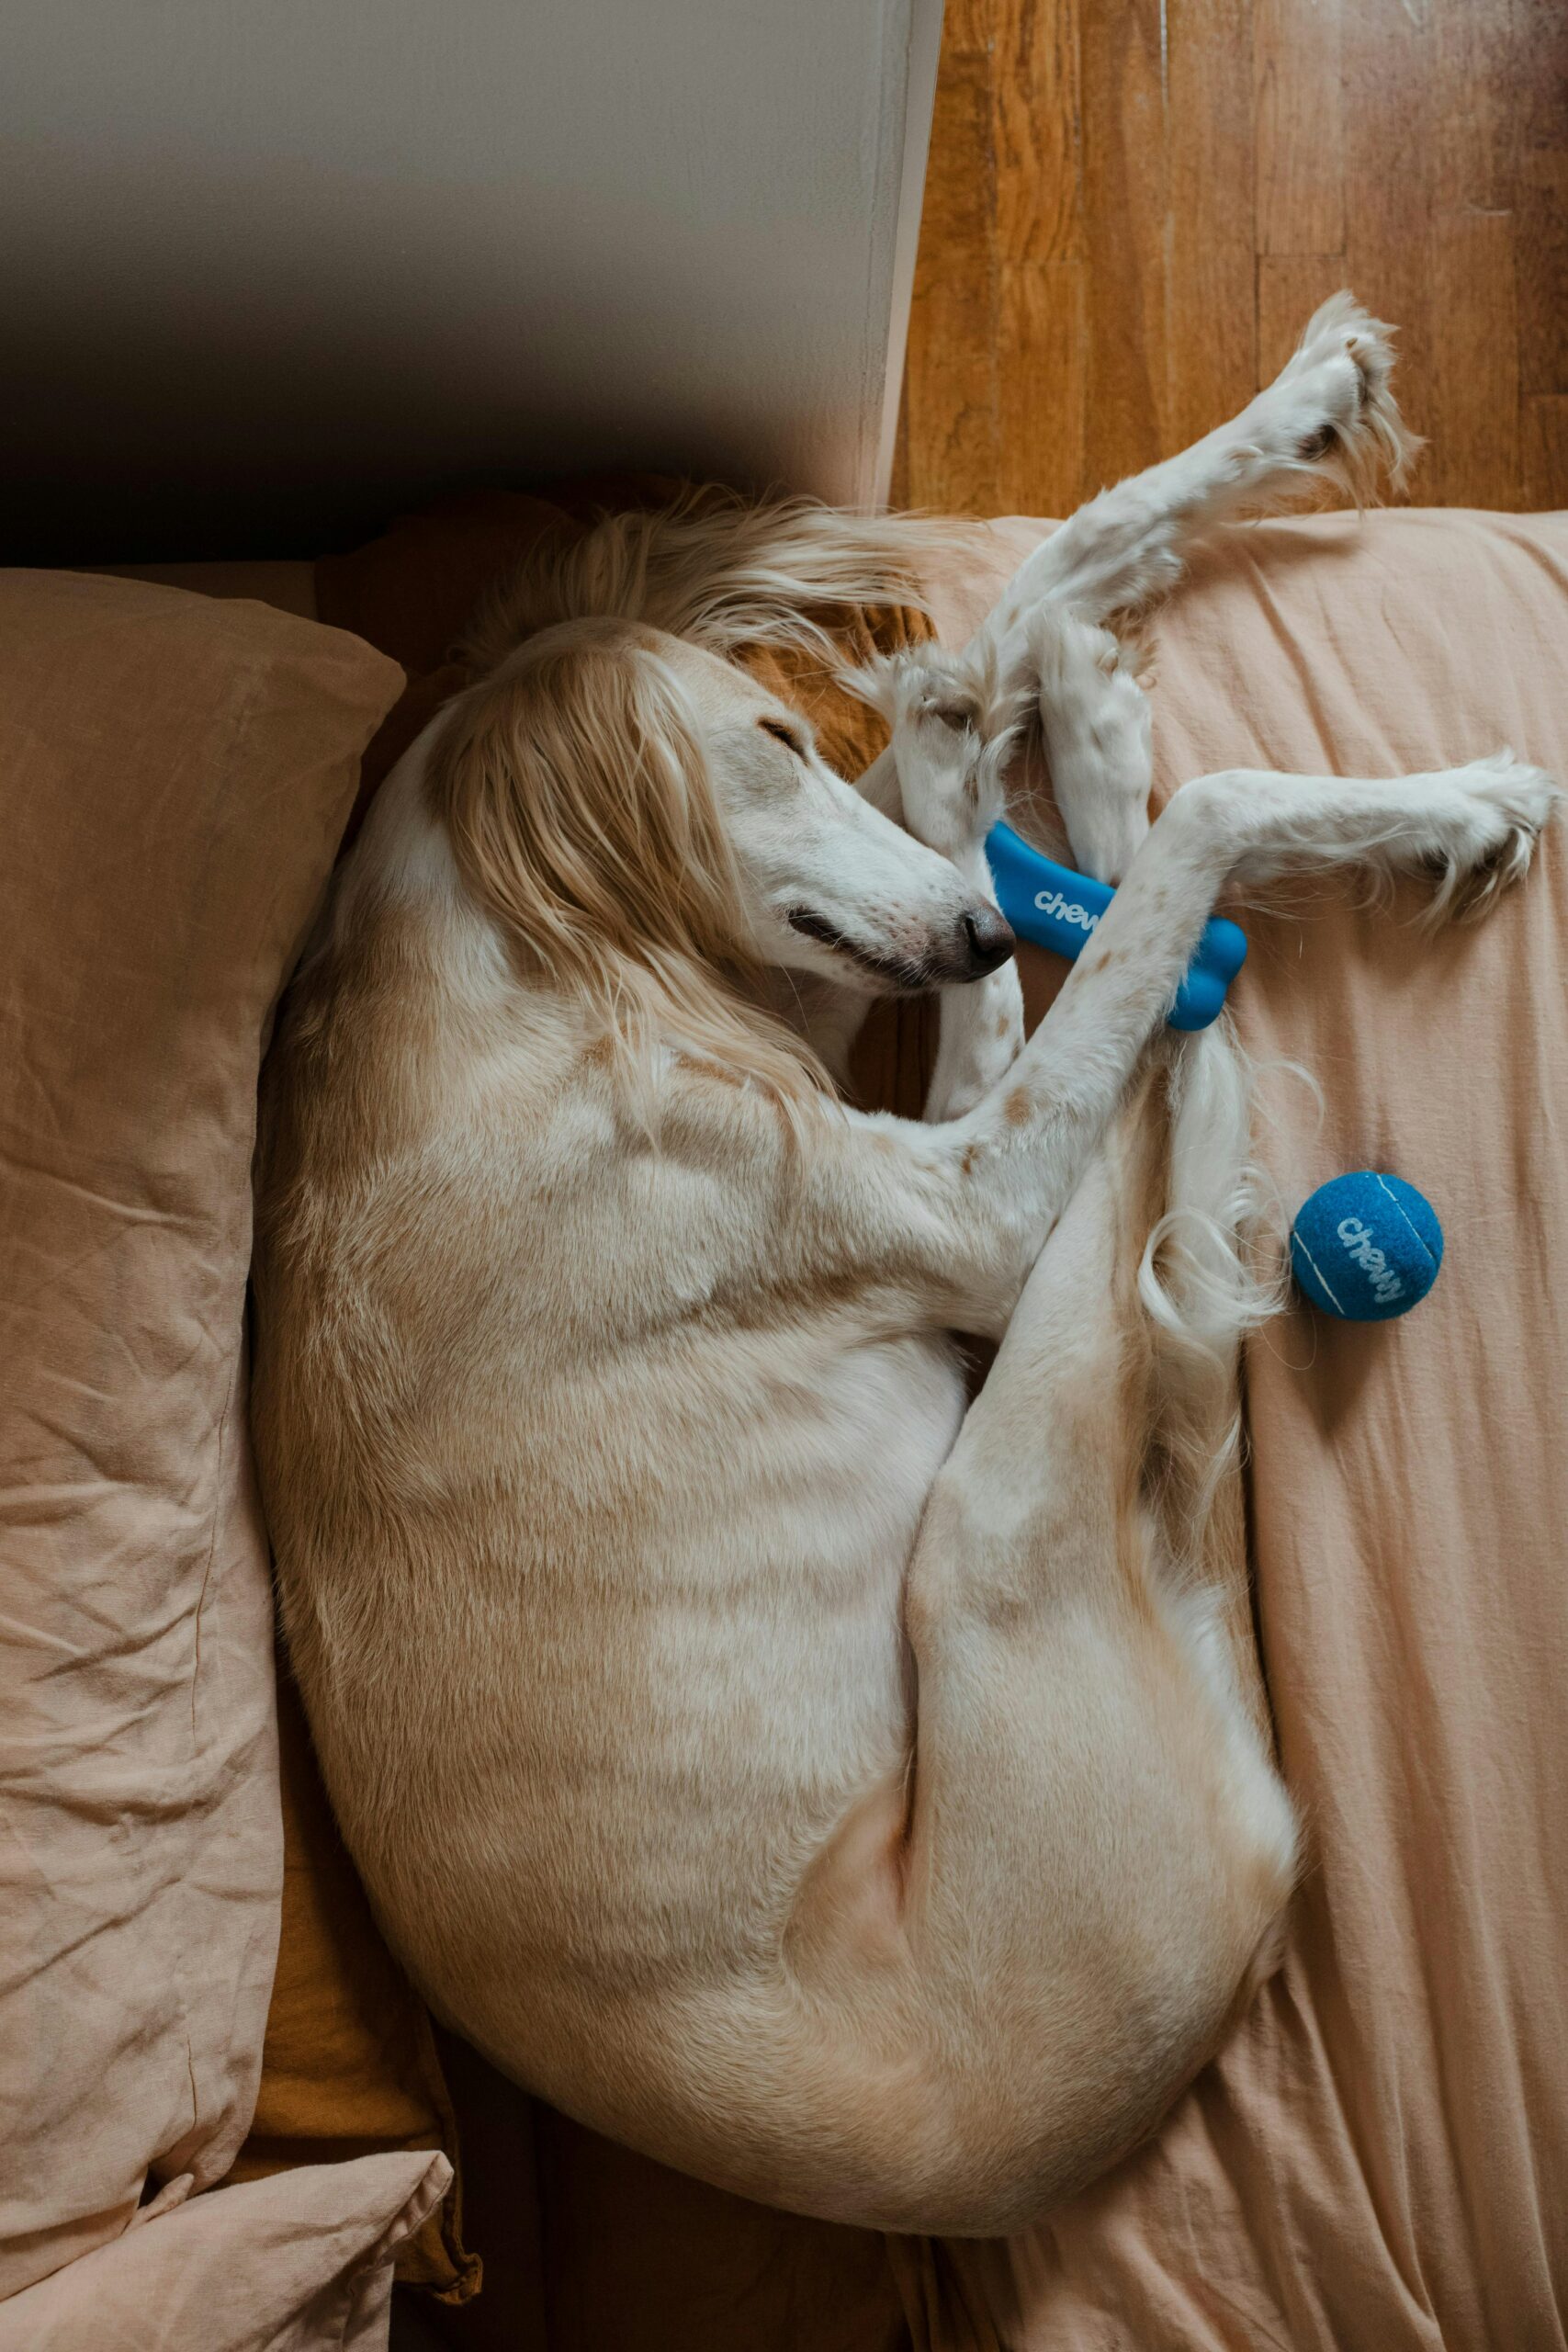 Discover the hidden meanings behind common dog sleeping positions and deepen your bond with your furry friend.